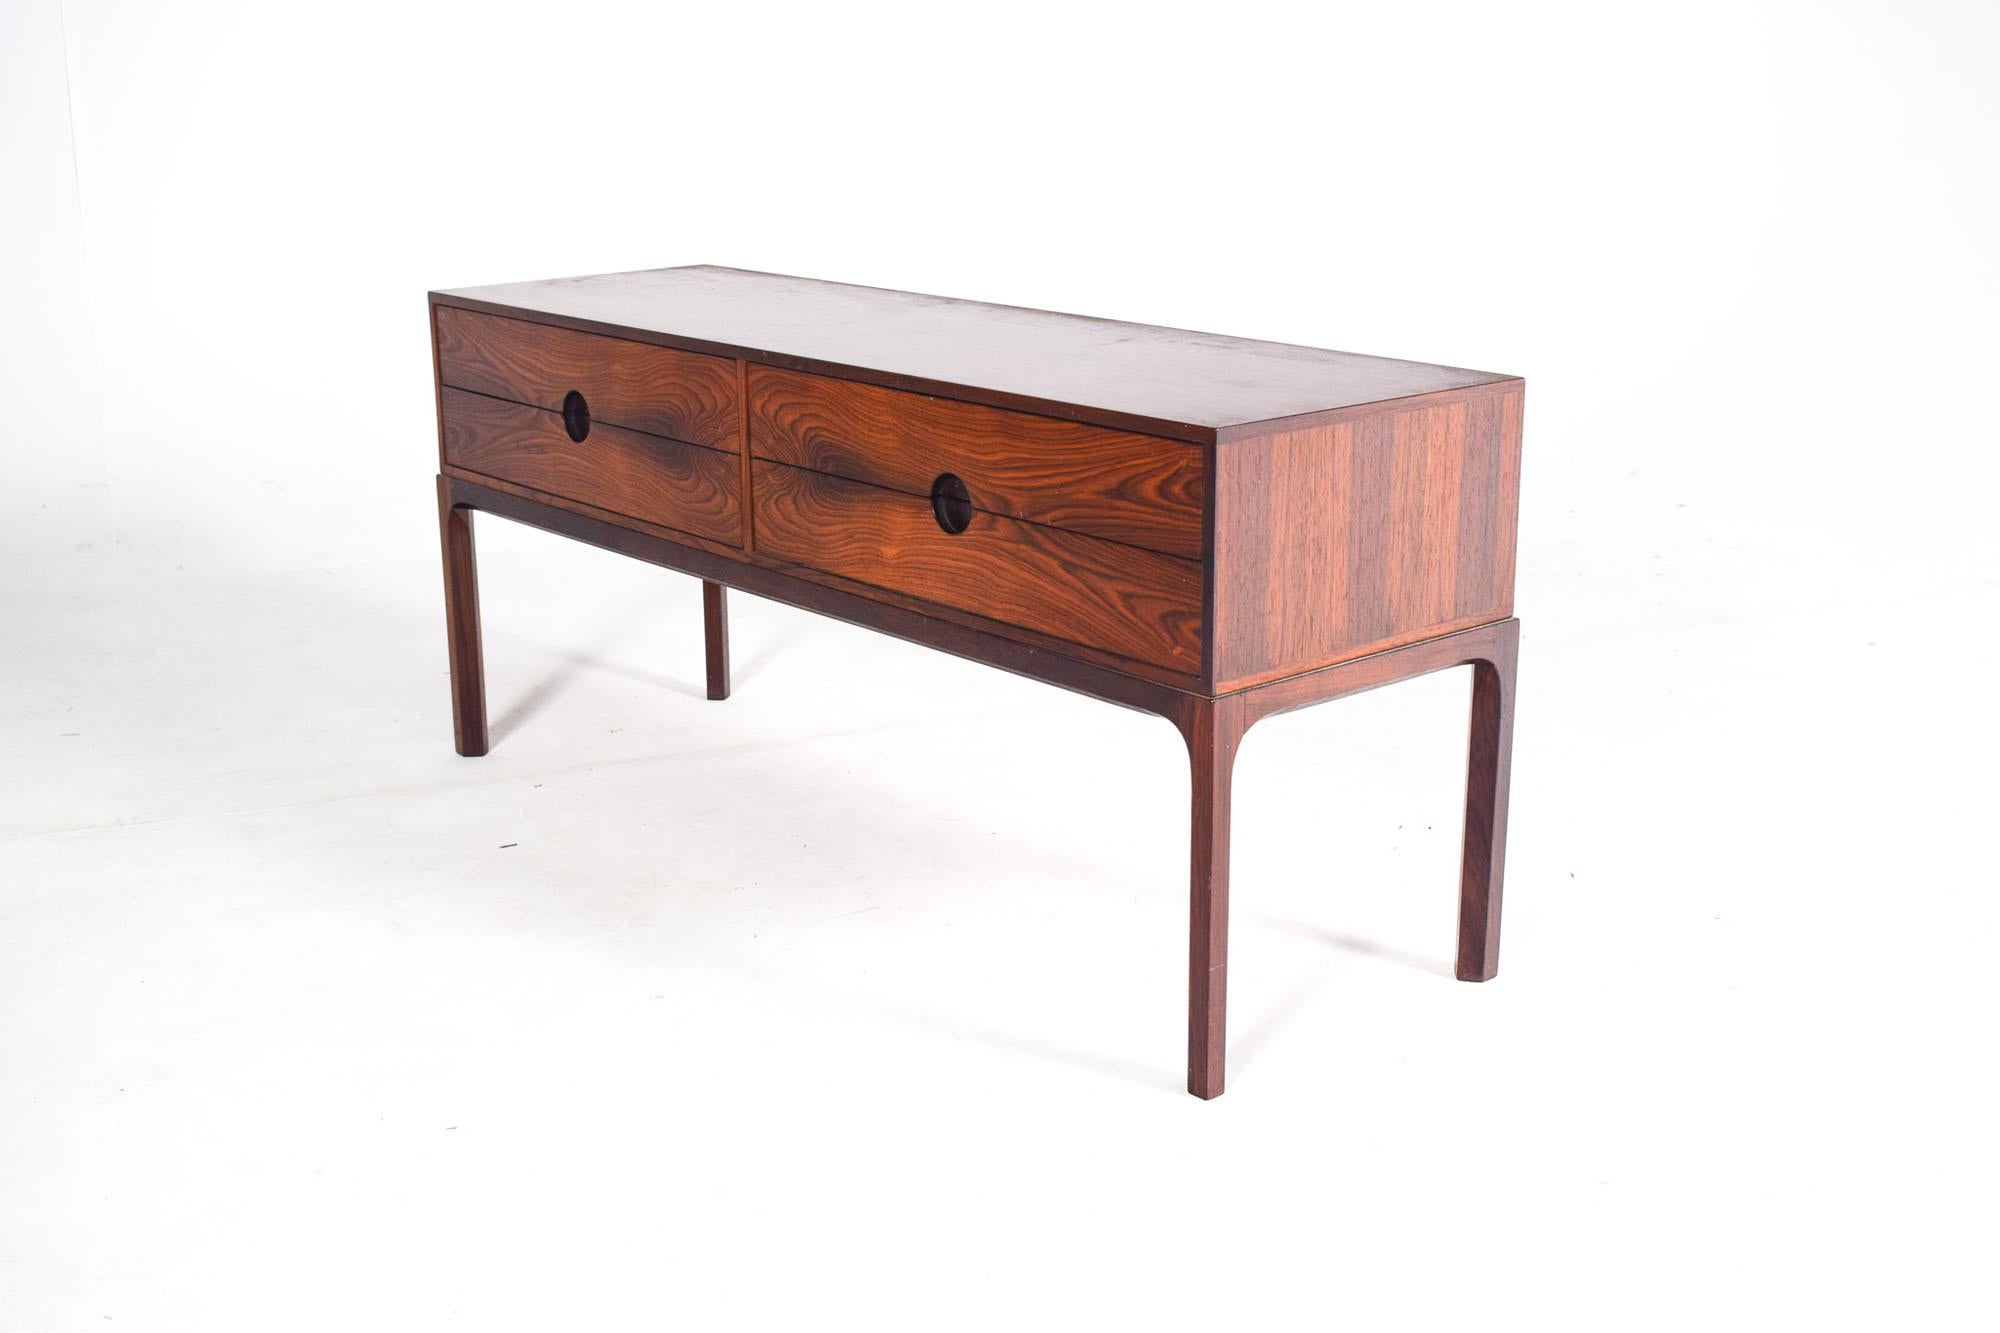 This rosewood low sideboard or side table model no. 394, designed by famous Danish designer Kai Kristiansen and manufactured Aksel Kjersgaard, will add charm to your home. The sideboard’s design follows in the vein of Scandinavian functionality,